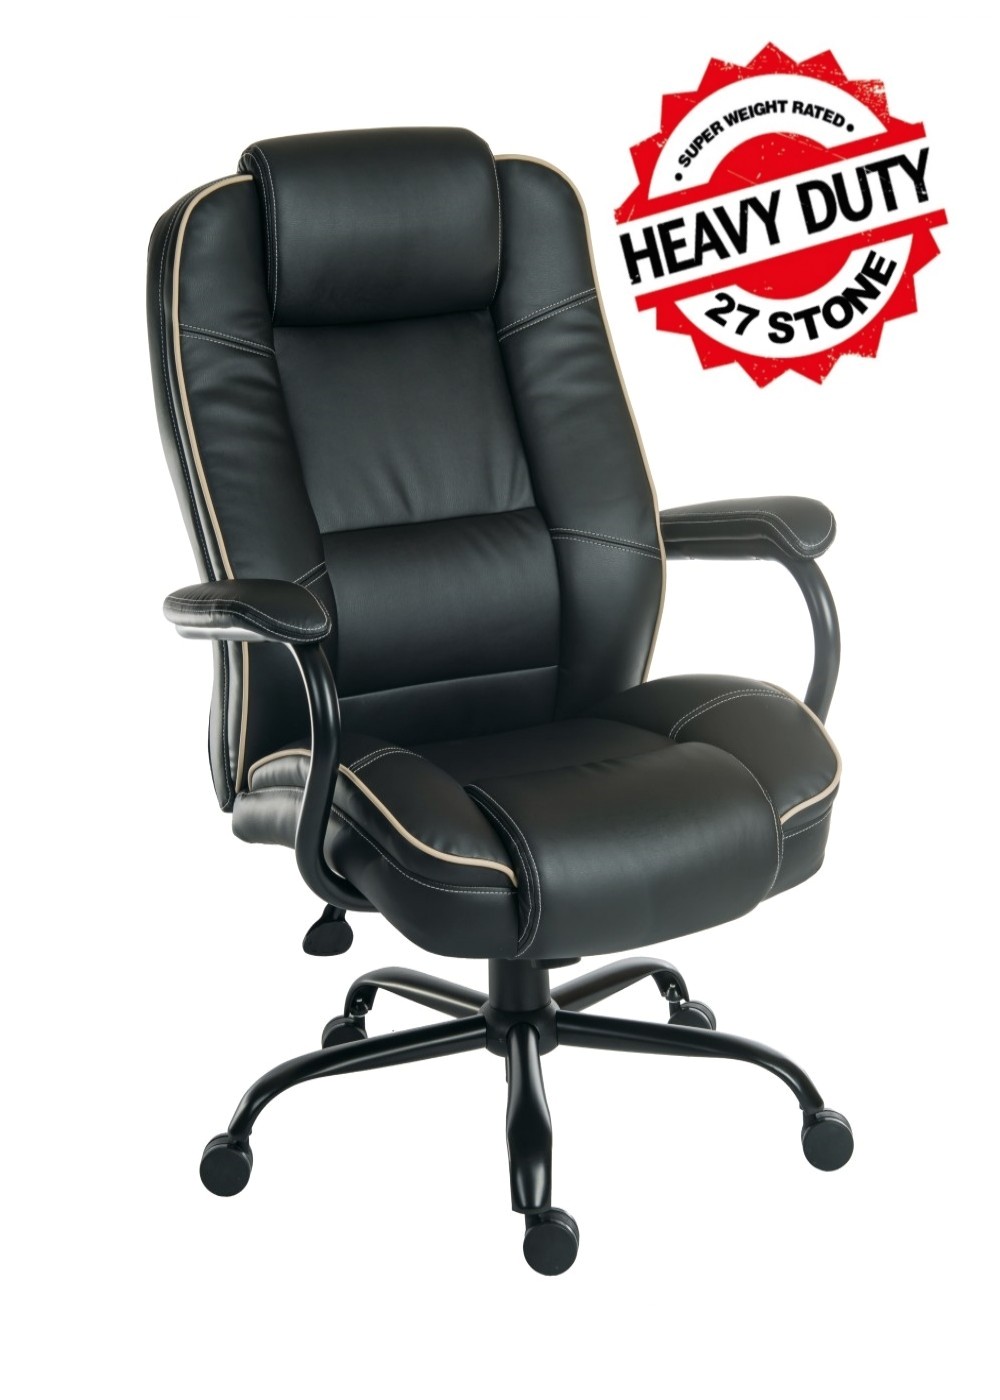 goliath duo heavy duty office chair b992 black msg the page you were trying to access no longer exists please browse the shop to find what you are looking for